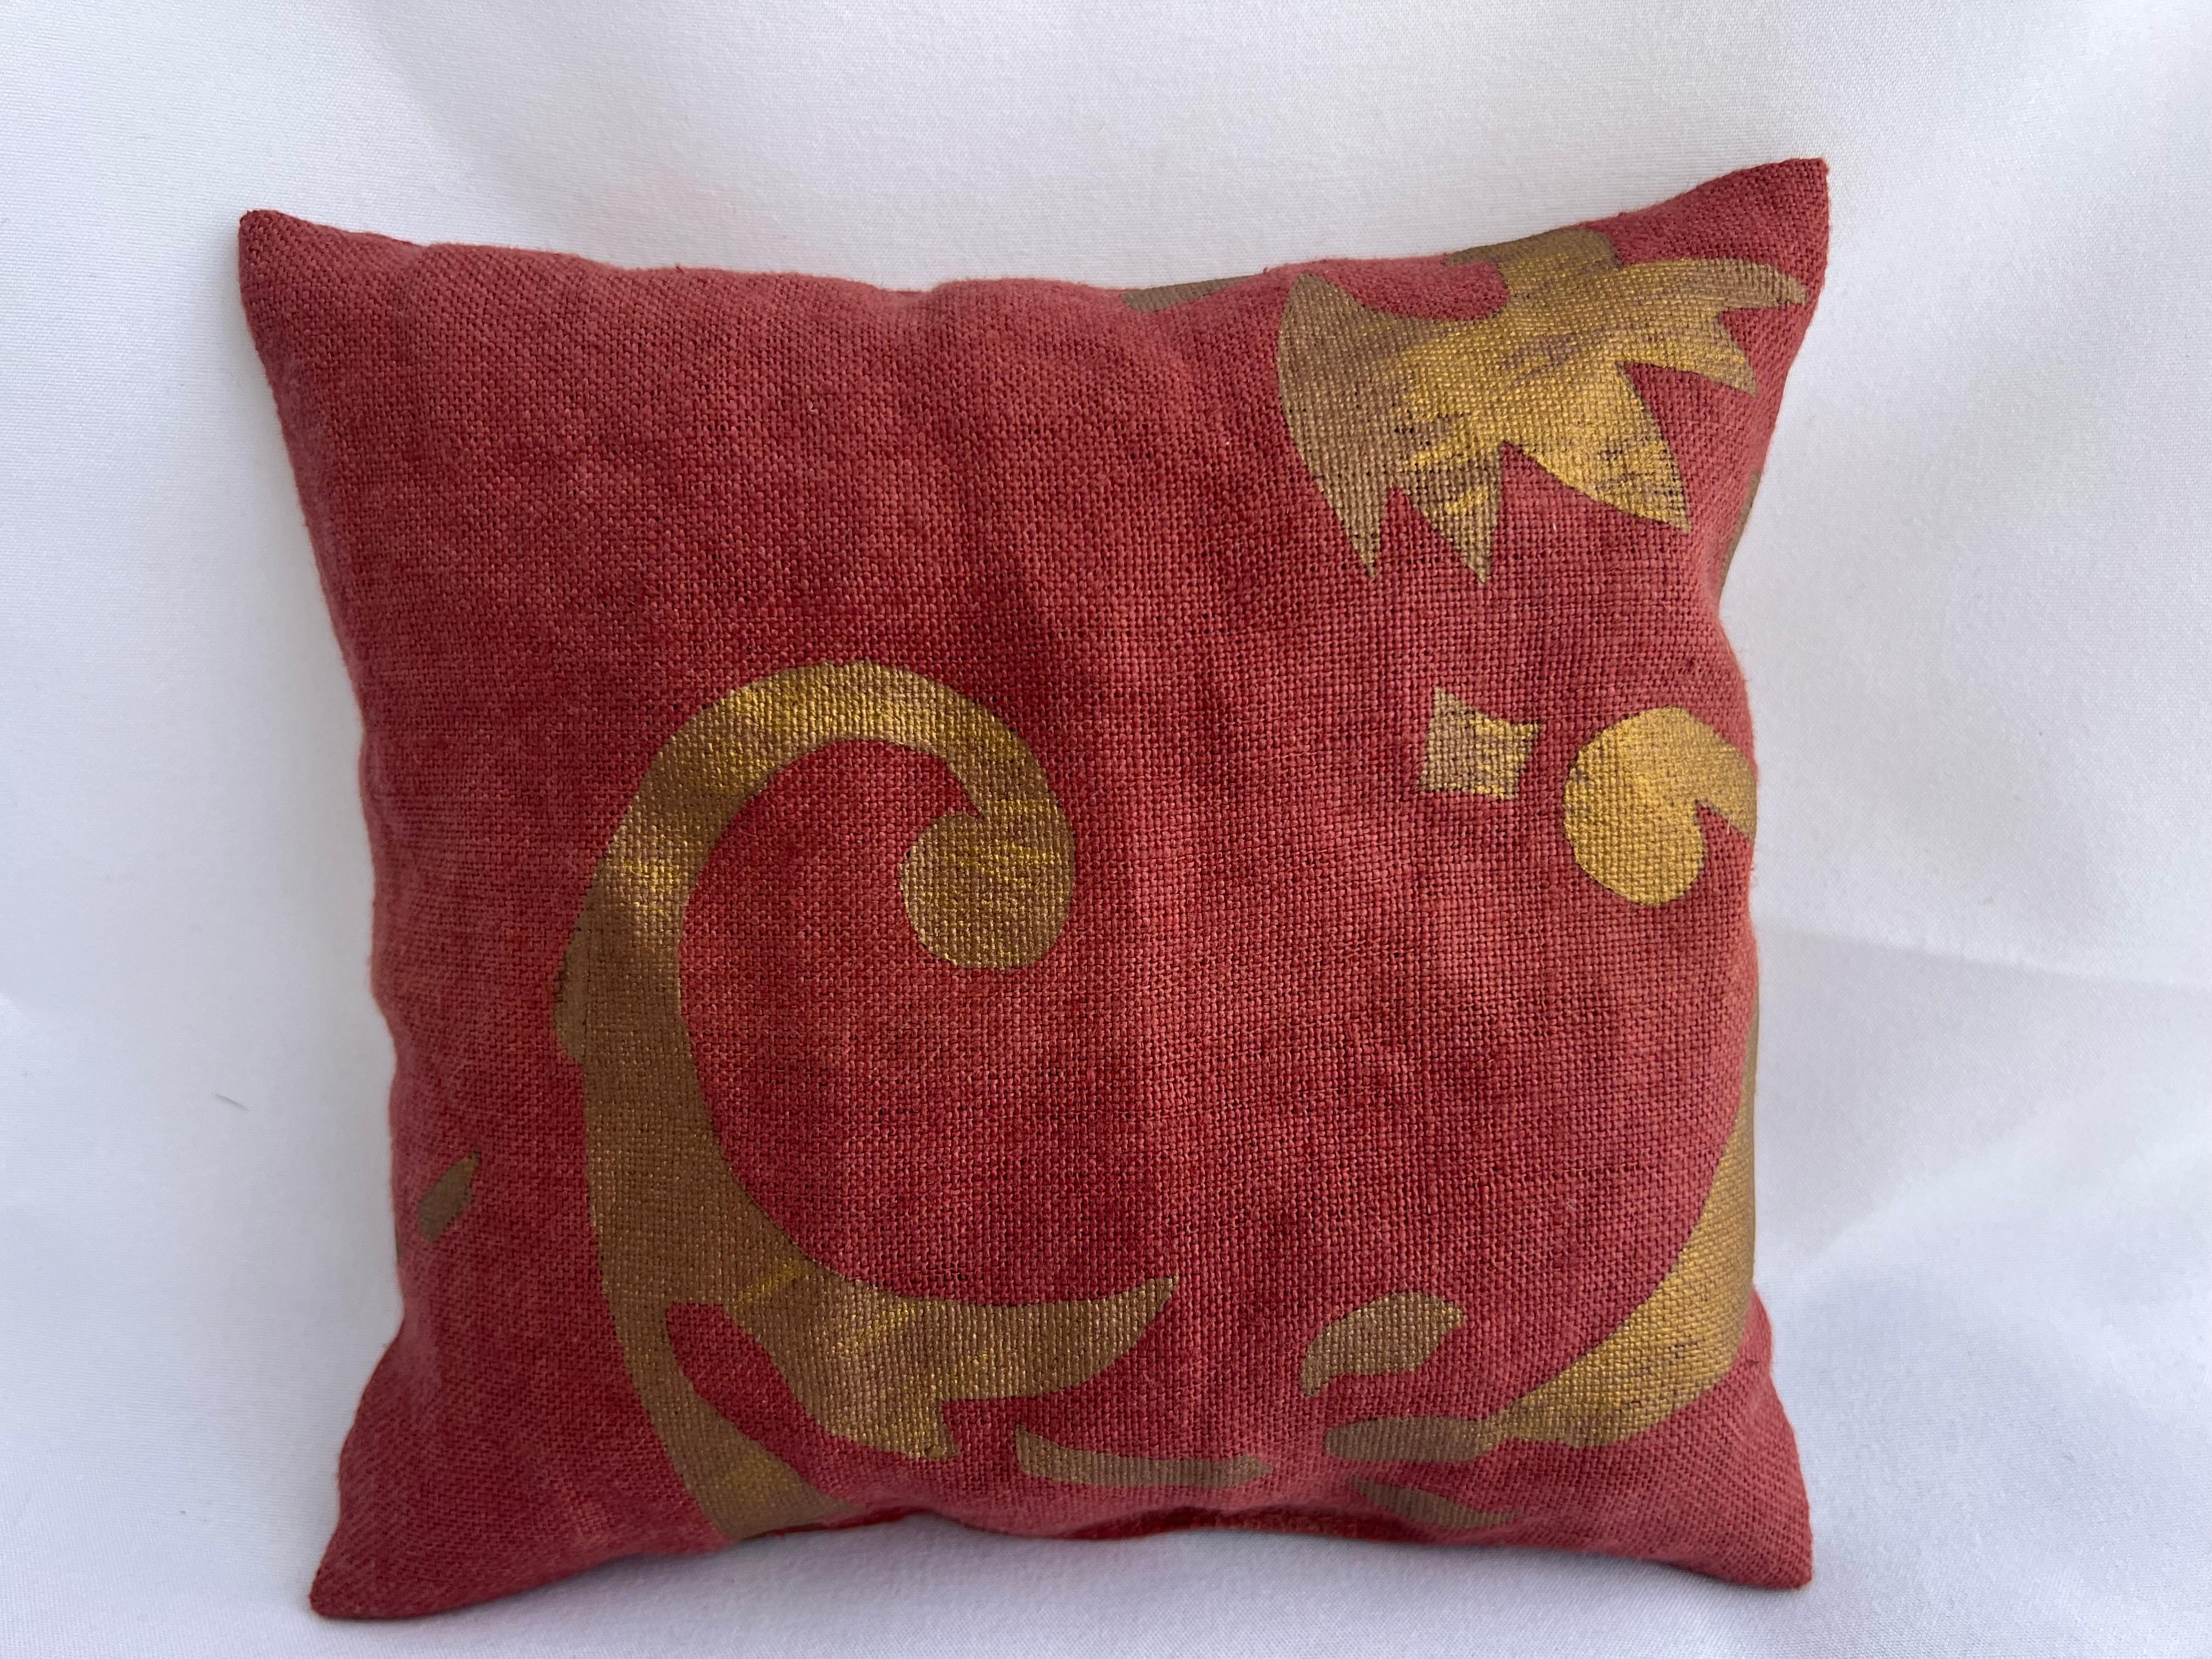 Nomi linen pillow in red & gold print,  filled with lavender.  These make great host gifts or any gift.  You can buy three and tie them together with a great ribbon and you are good.